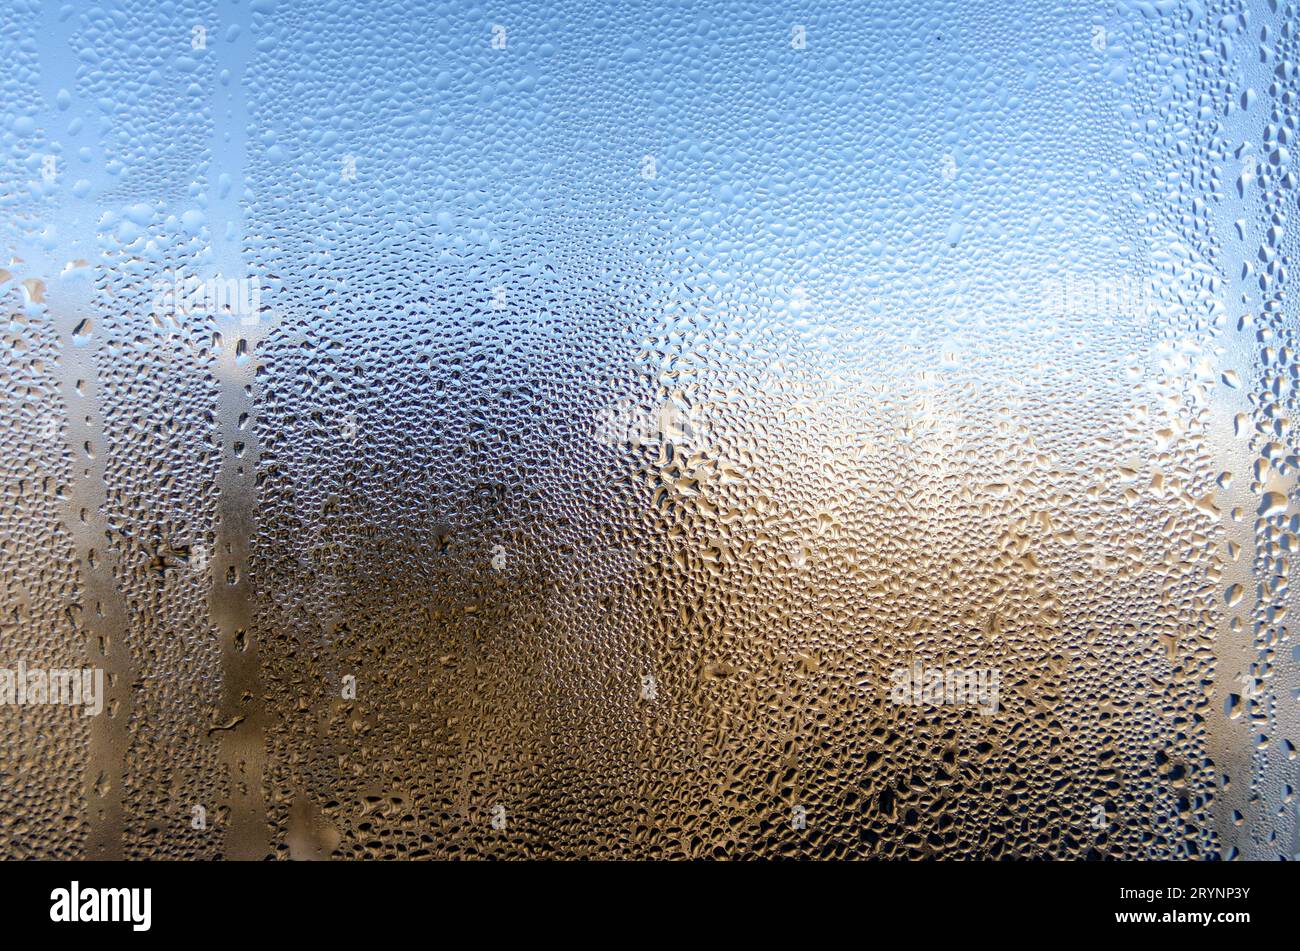 Water drops on glass surface close up Stock Photo